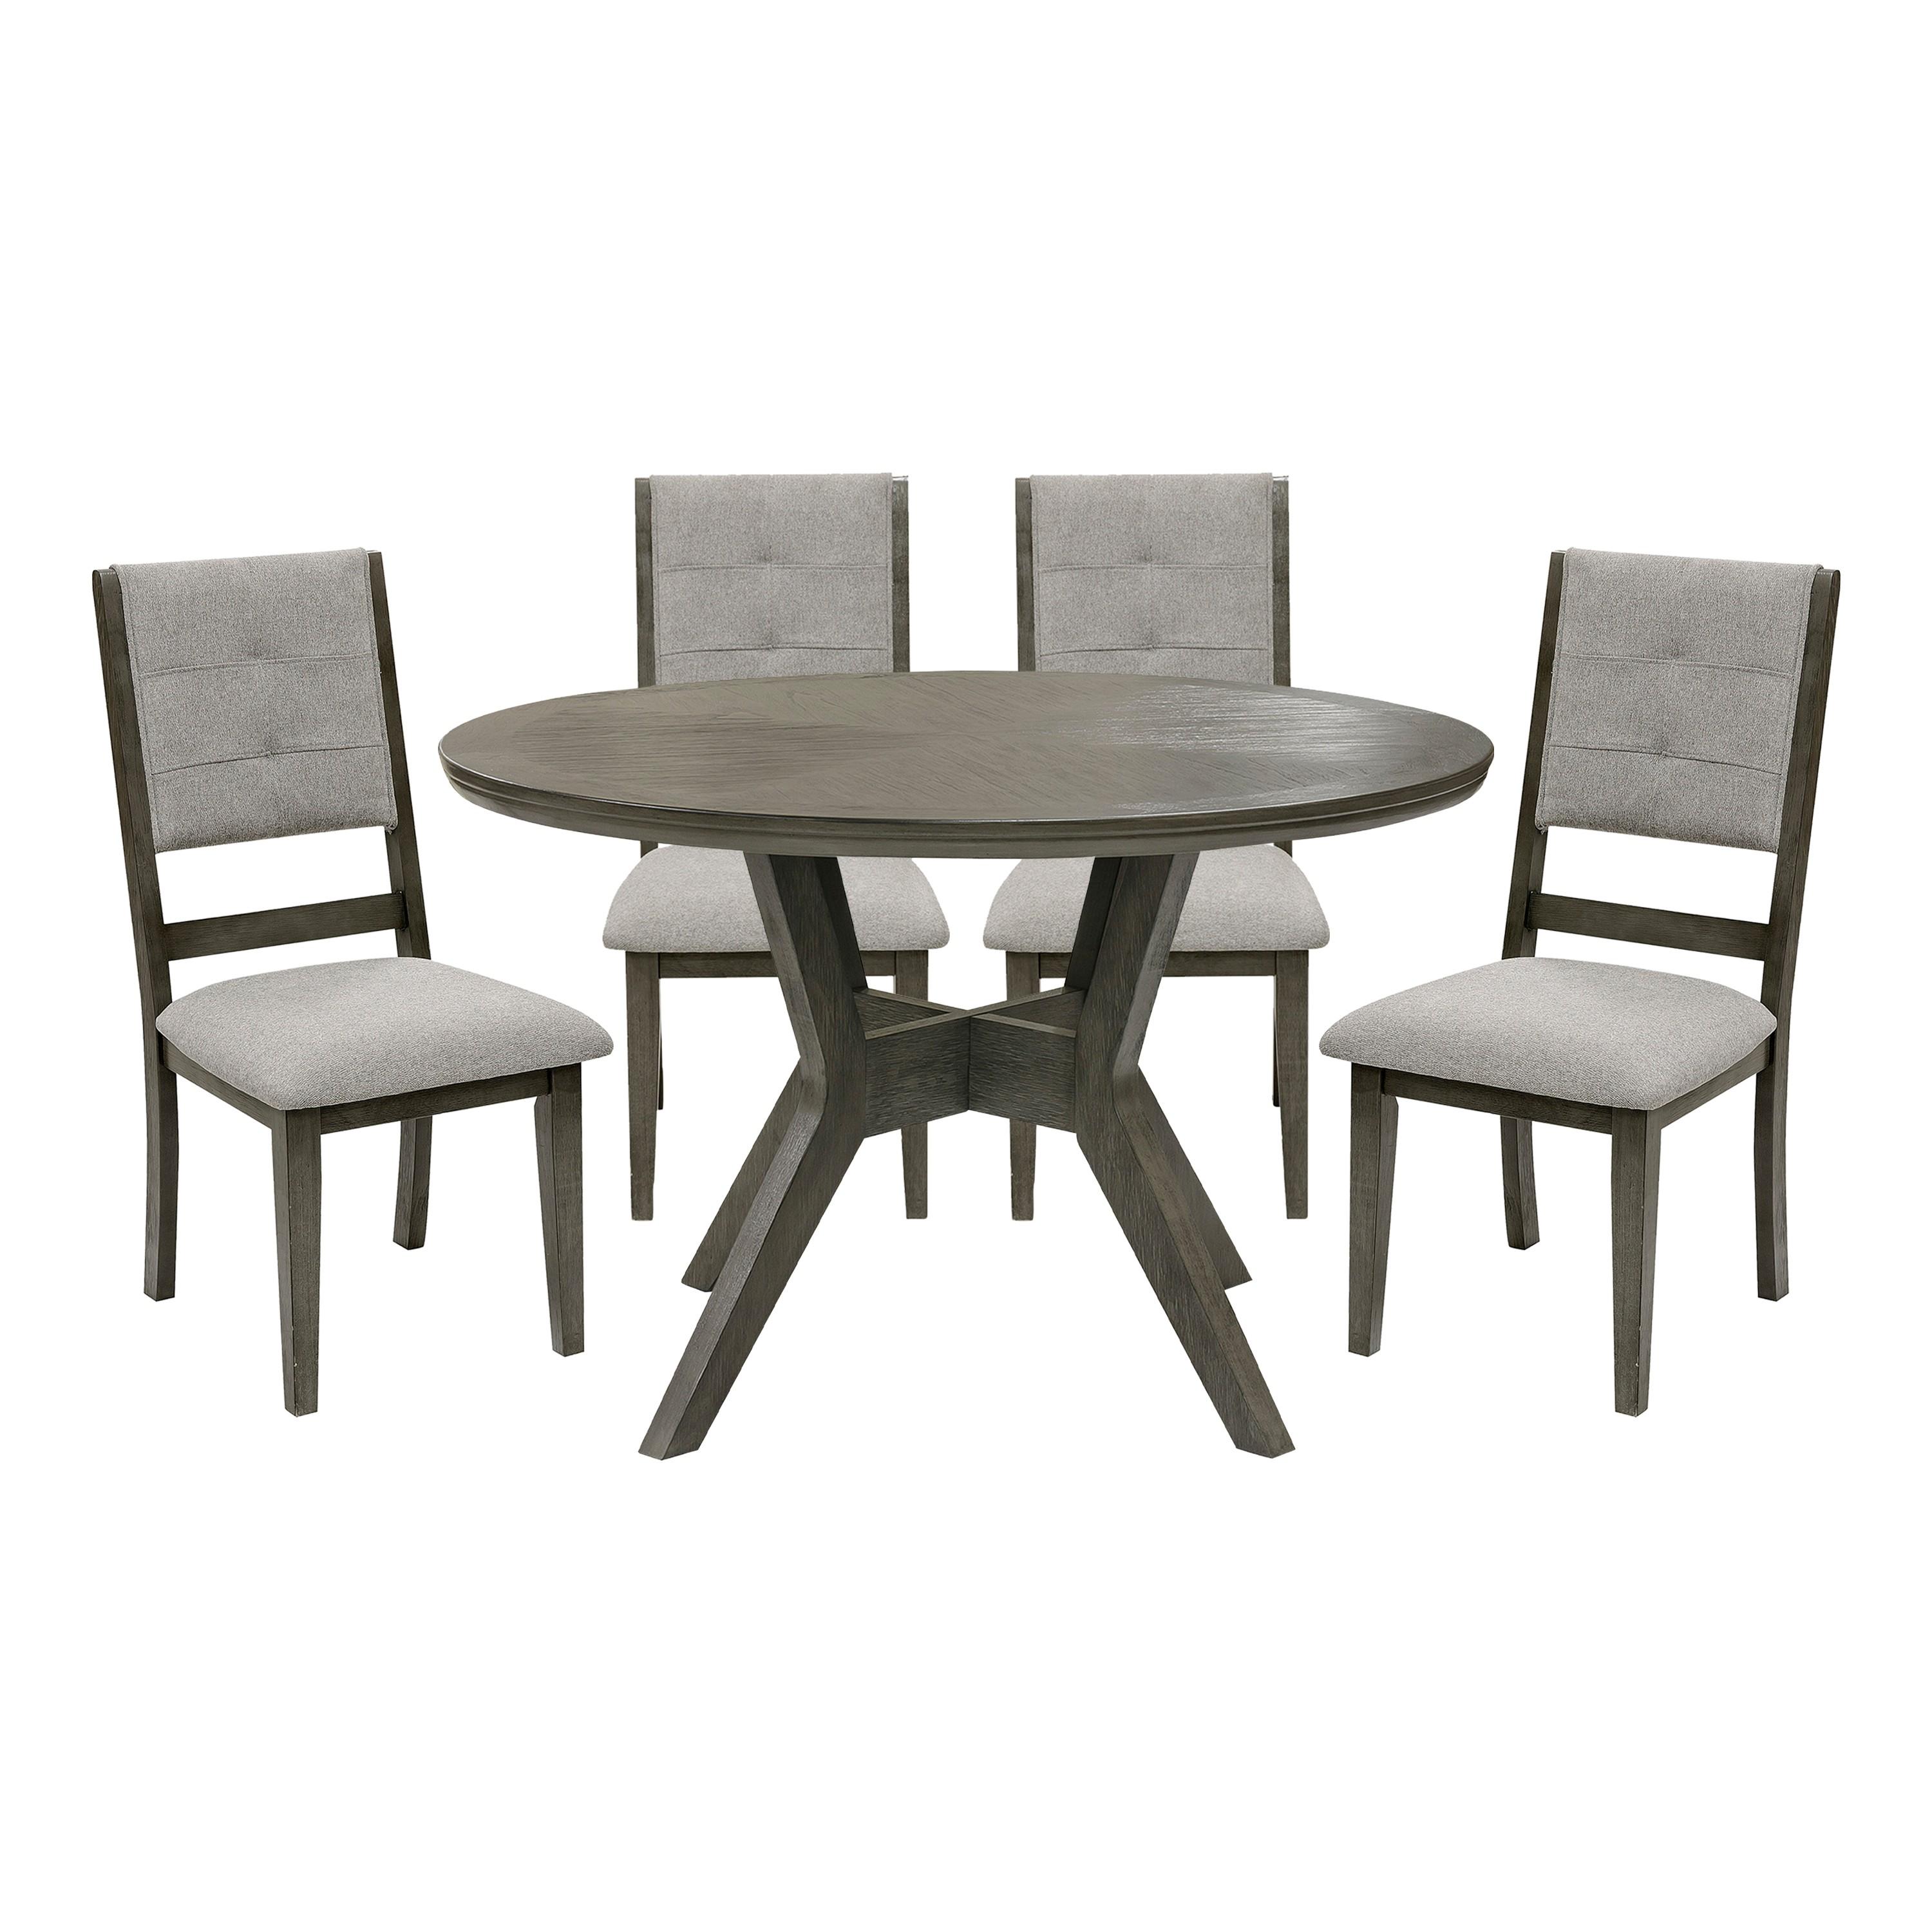 Transitional Dining Room Set 5165GY-48*5PC Nisky 5165GY-48*5PC in Gray Polyester